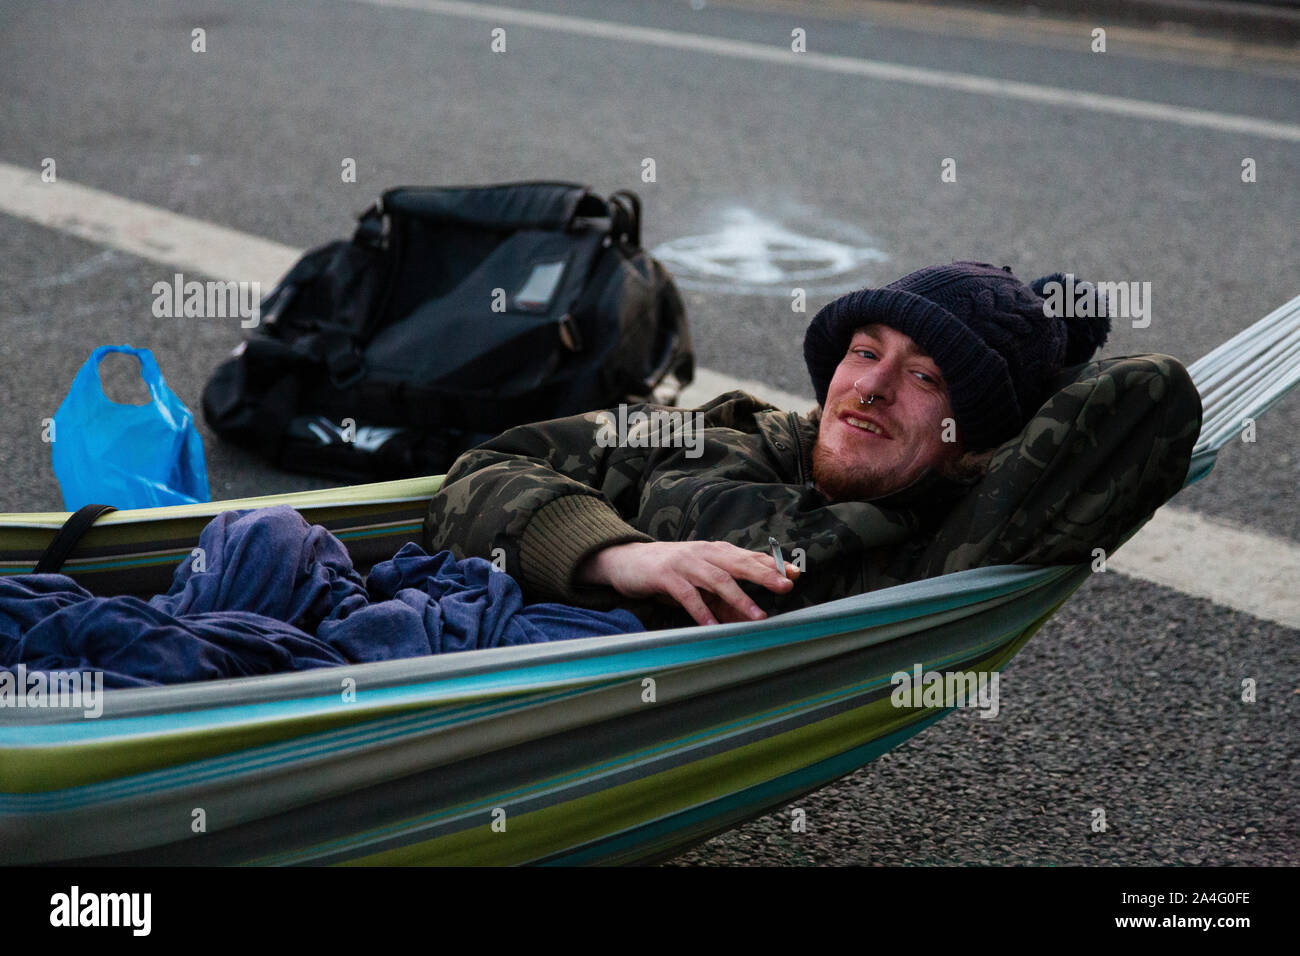 London, UK. An Extinction Rebellion protester smokes a cigarette in his hammock on Waterloo Bridge in the early morning. Stock Photo